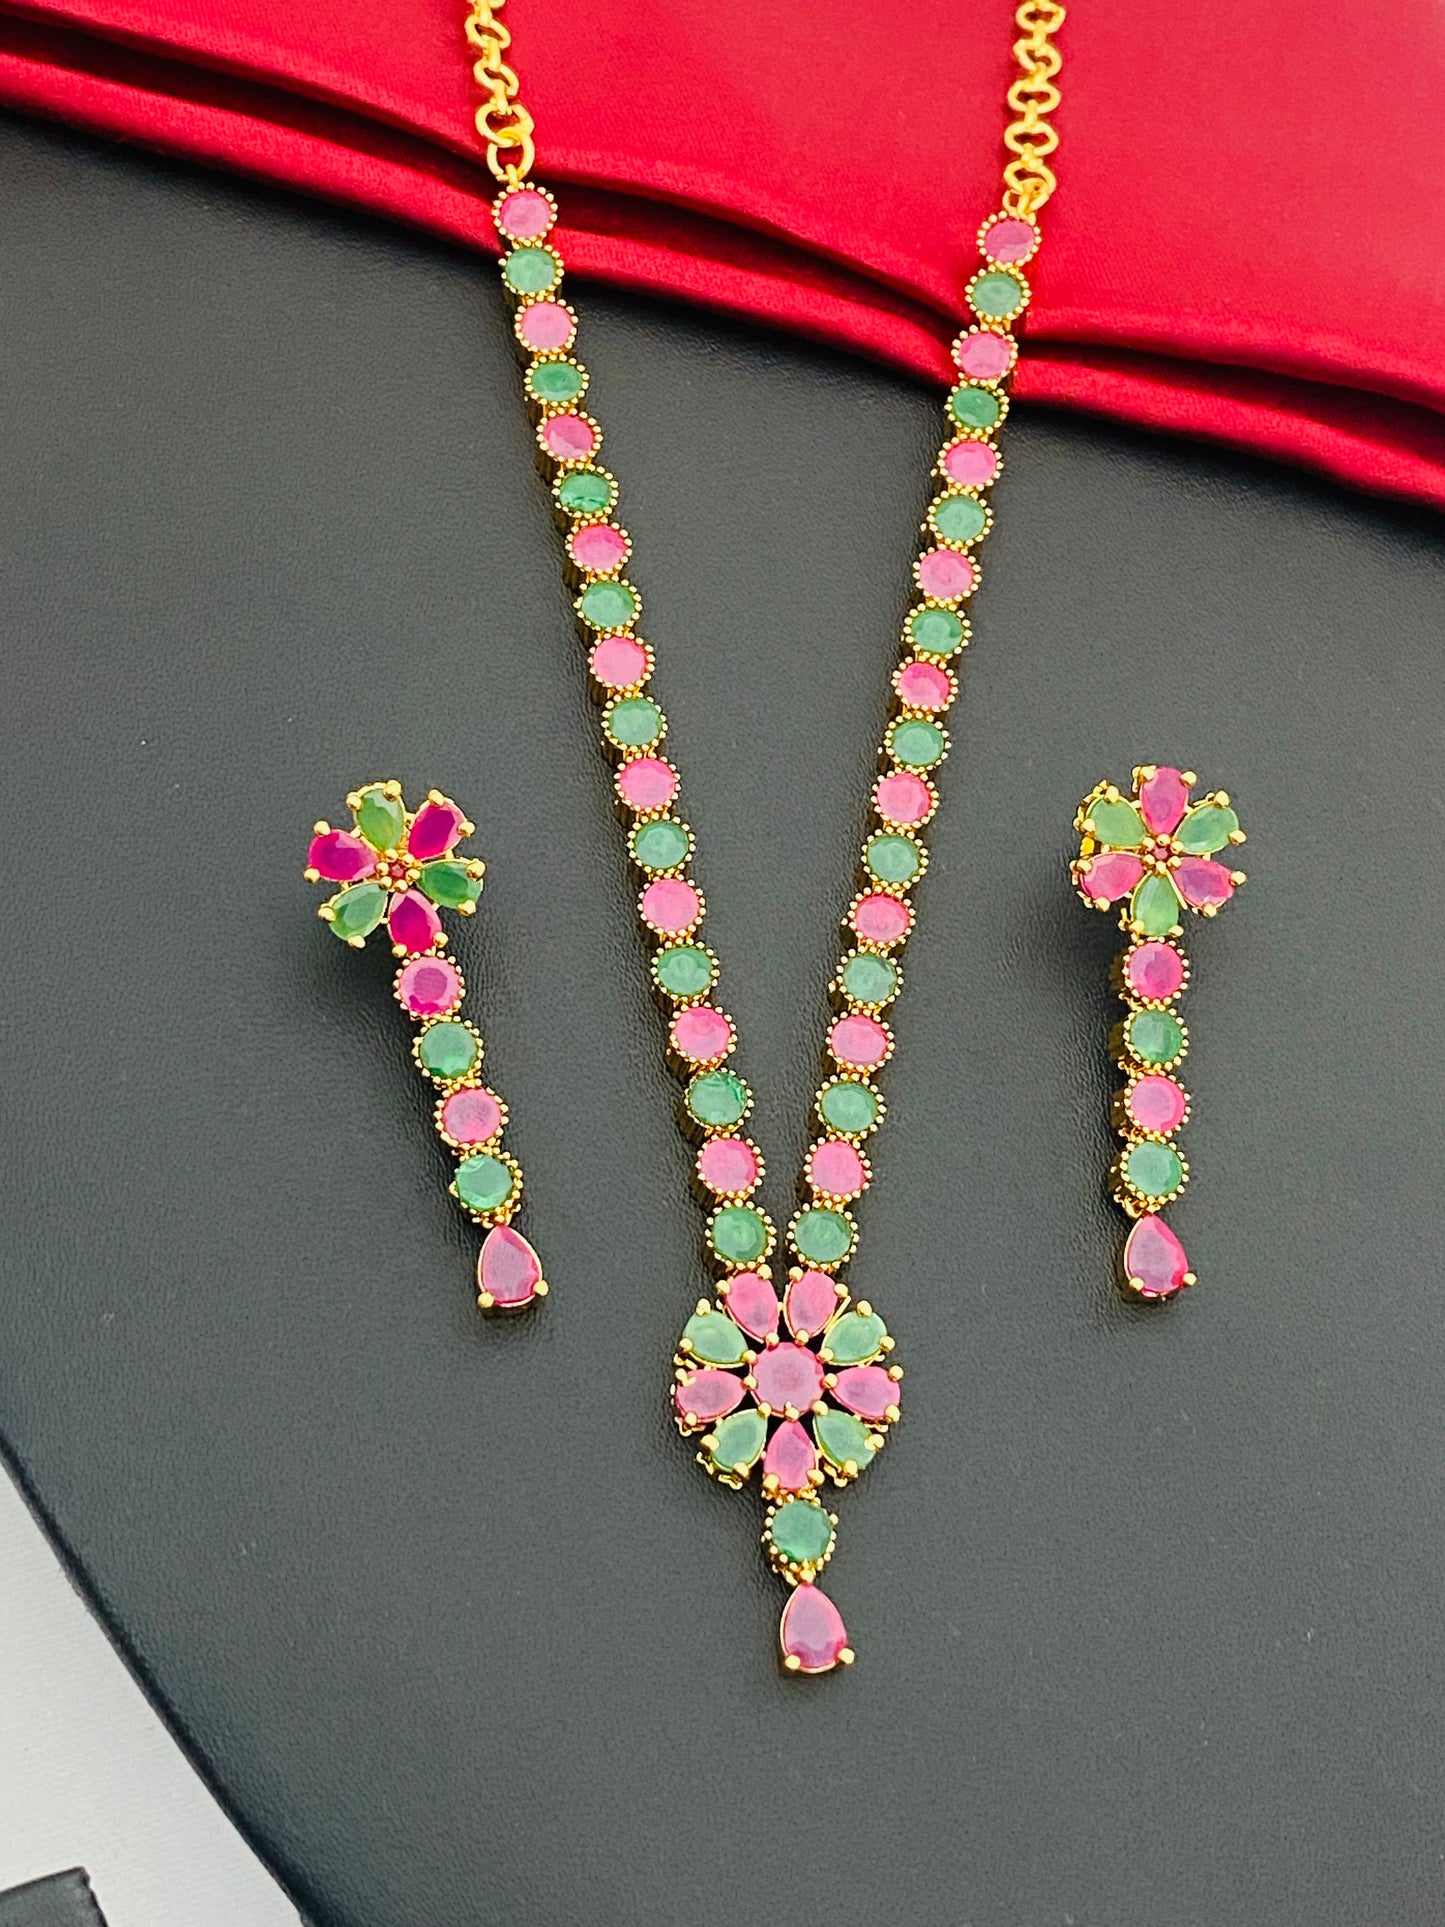 Ruby Stone Studded Floral Shaped Necklace With Earrings In USA